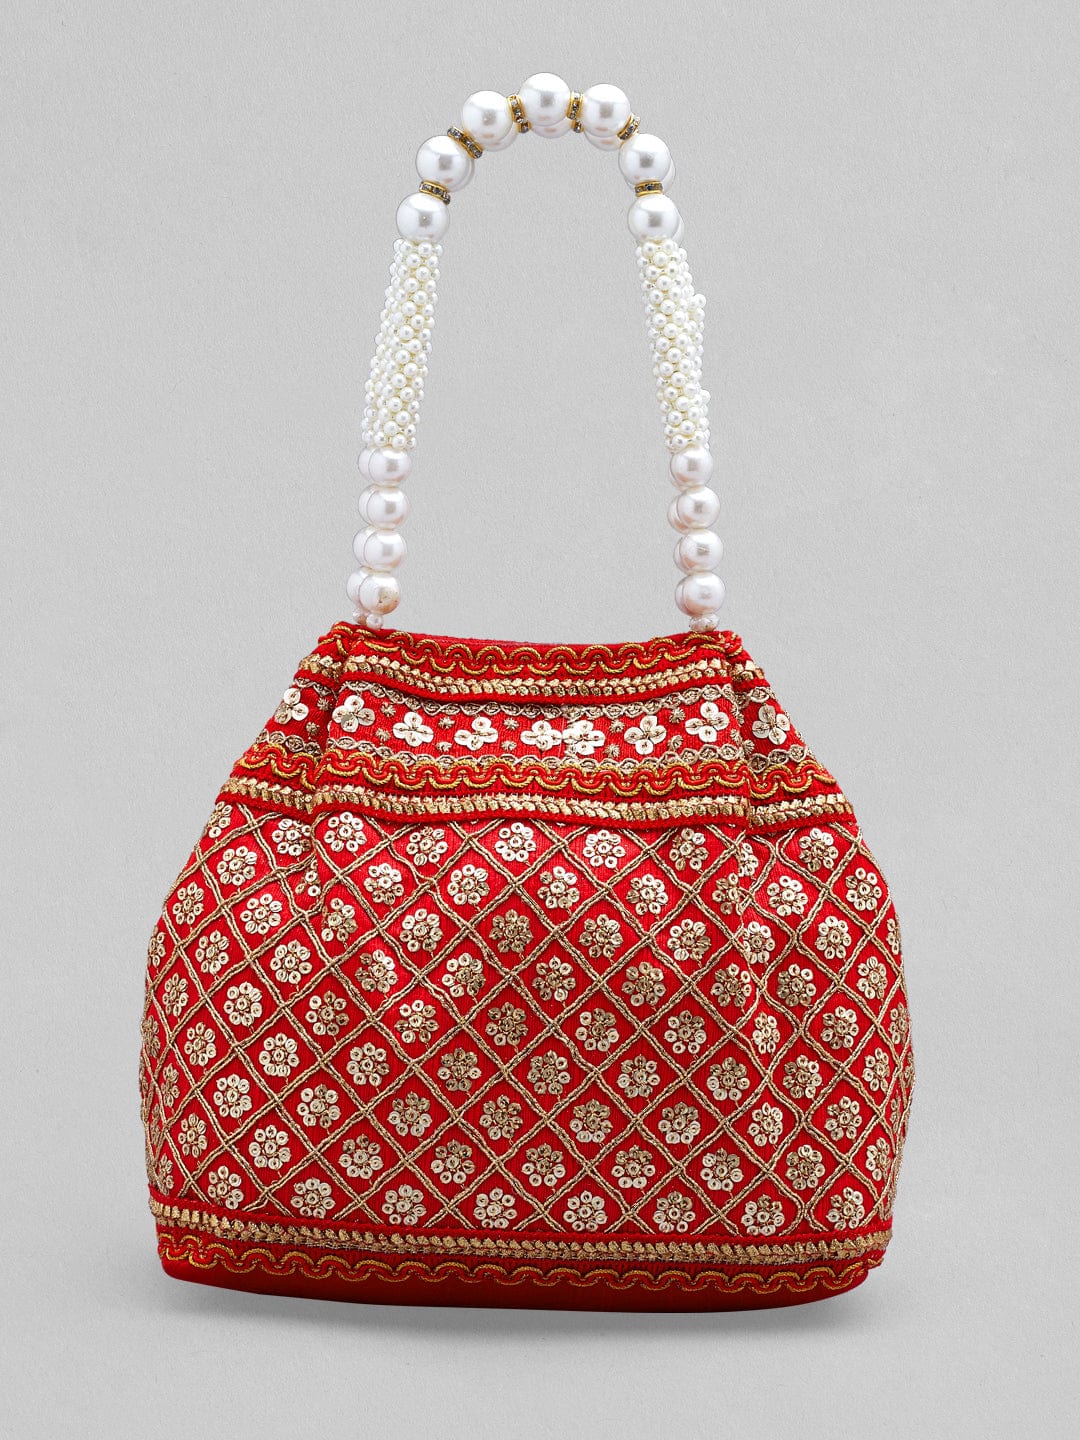 Rubans Red Coloured Potli Handbag With Golden Embroidery And Pearls Handbag &amp; Wallet Accessories